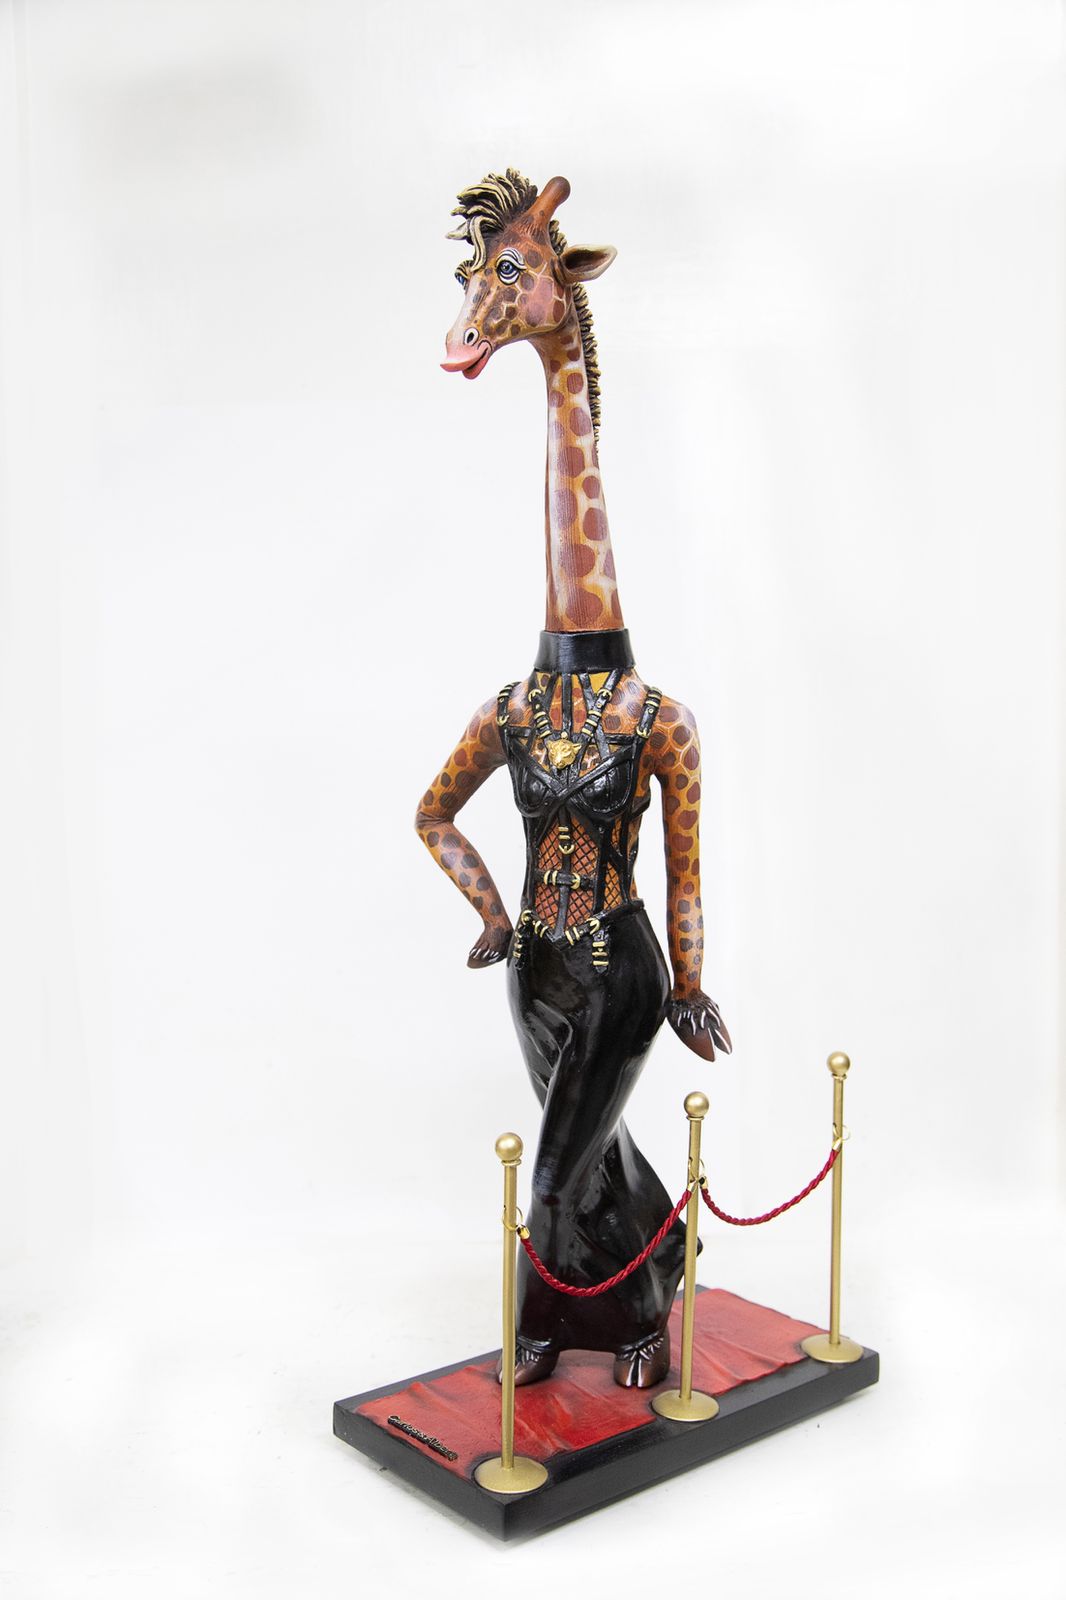 Signed, limited edition giraffe on red carpet sculpture